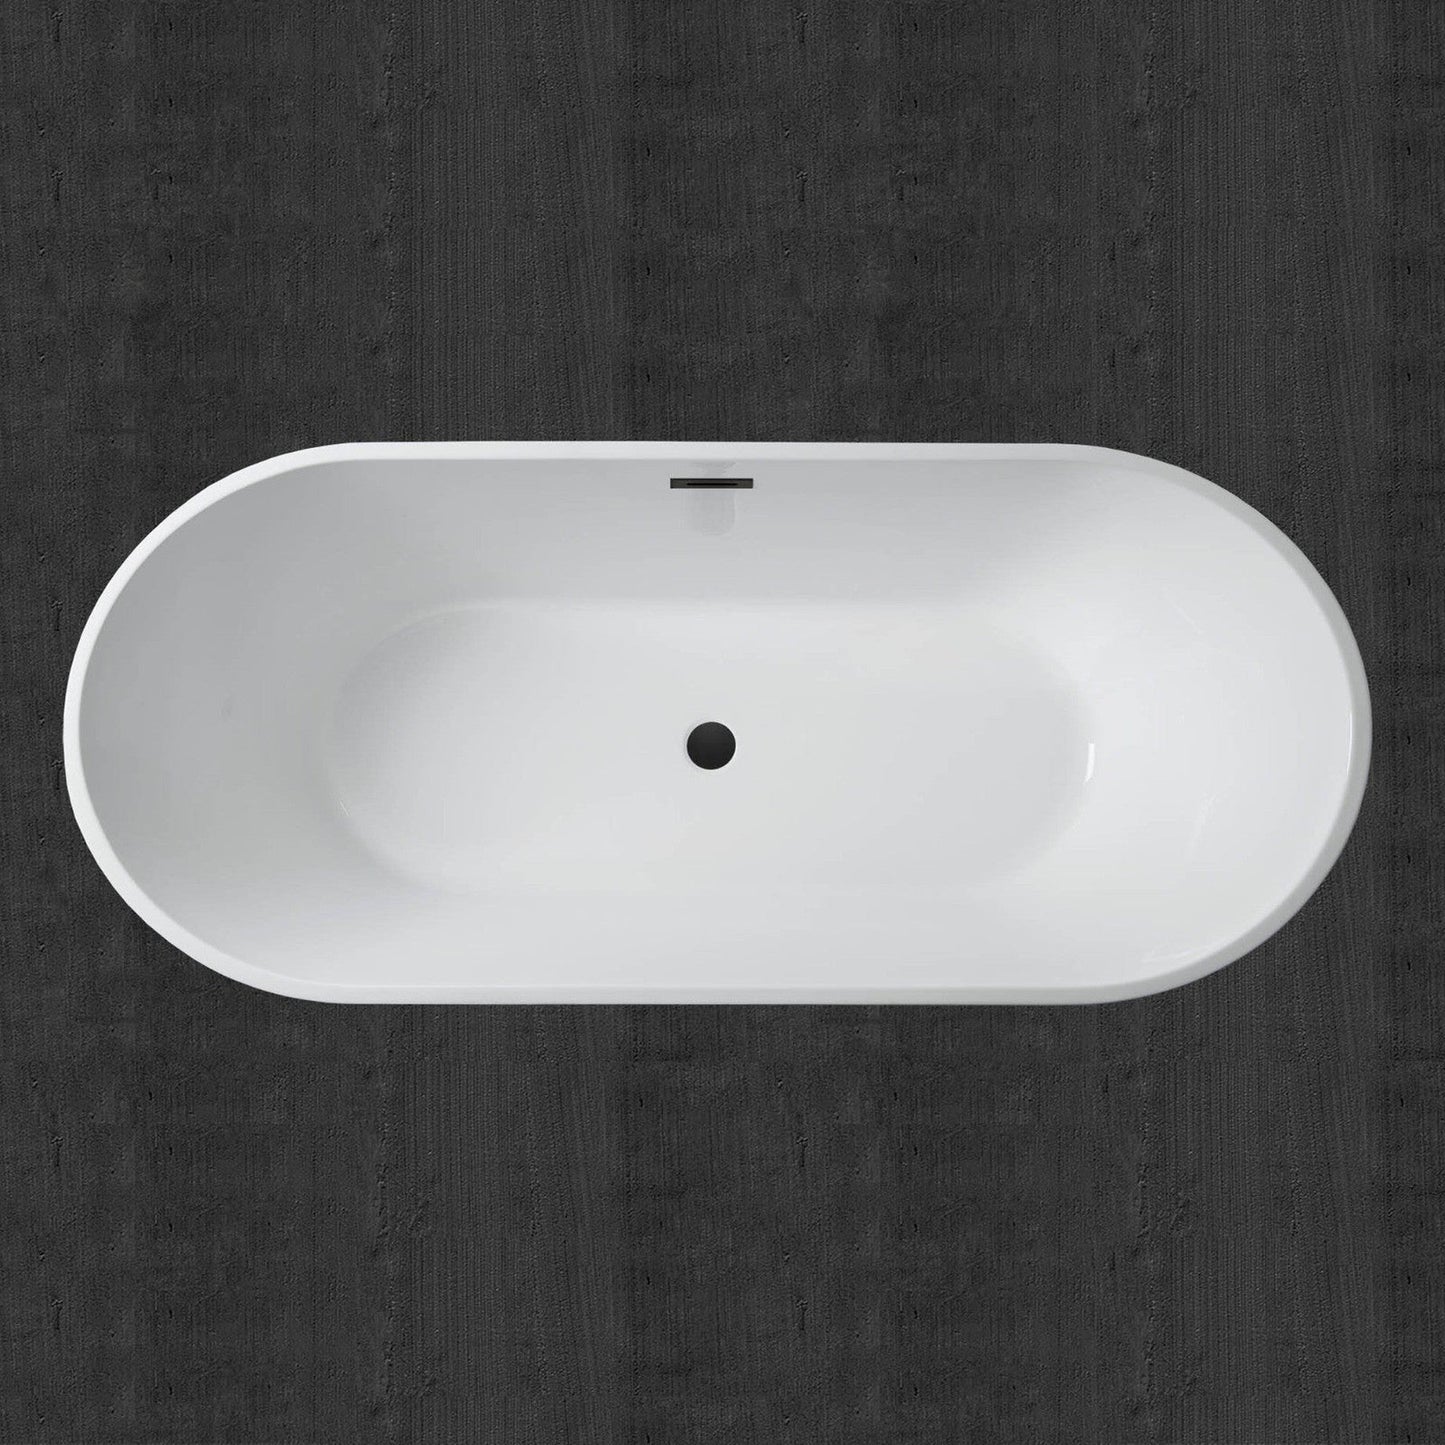 WoodBridge 71" White Acrylic Freestanding Contemporary Soaking Bathtub With Matte Black Drain, Overflow, F0006MBVT Tub Filler and Caddy Tray